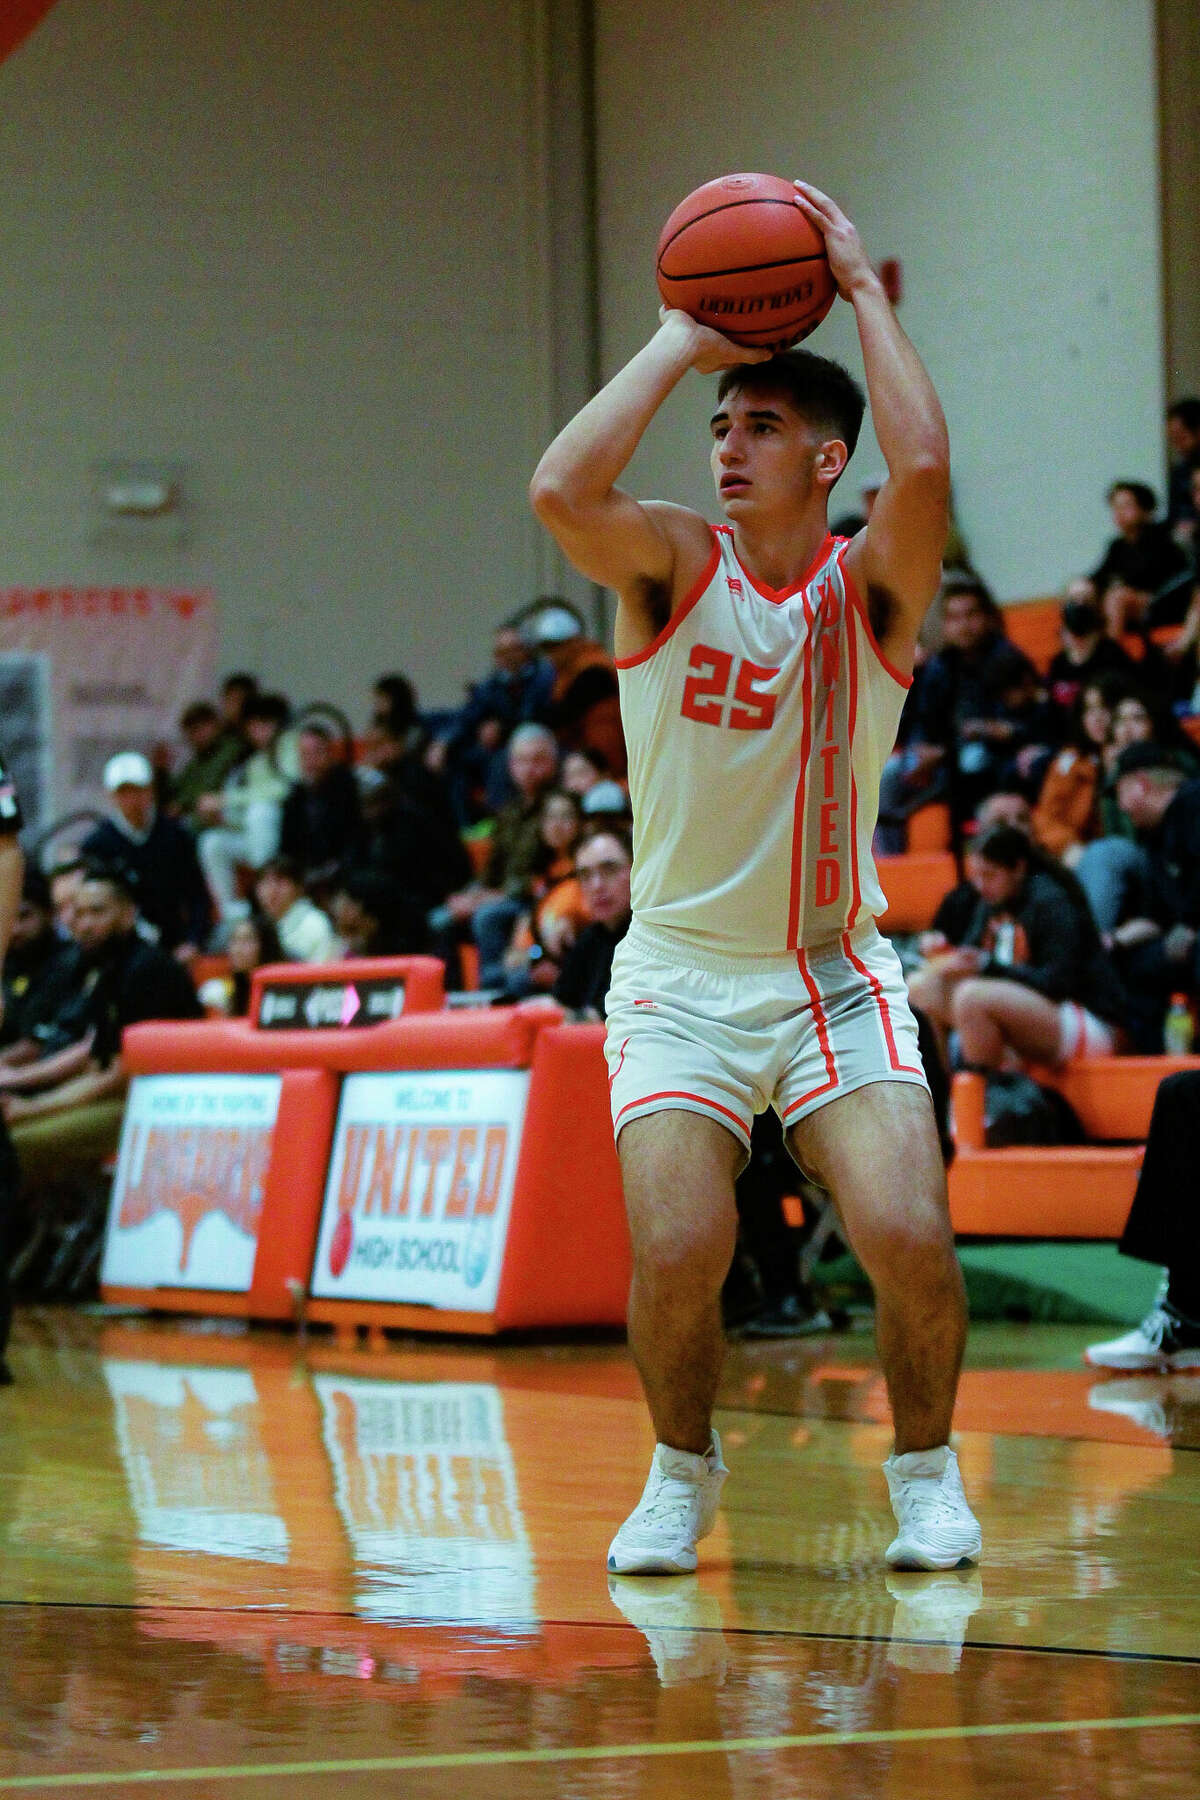 Diego Saldana has become one of United's -- and even Laredo's -- top players. And head coach Archie Ramos credits Saldana's rise to the senior's work ethic.